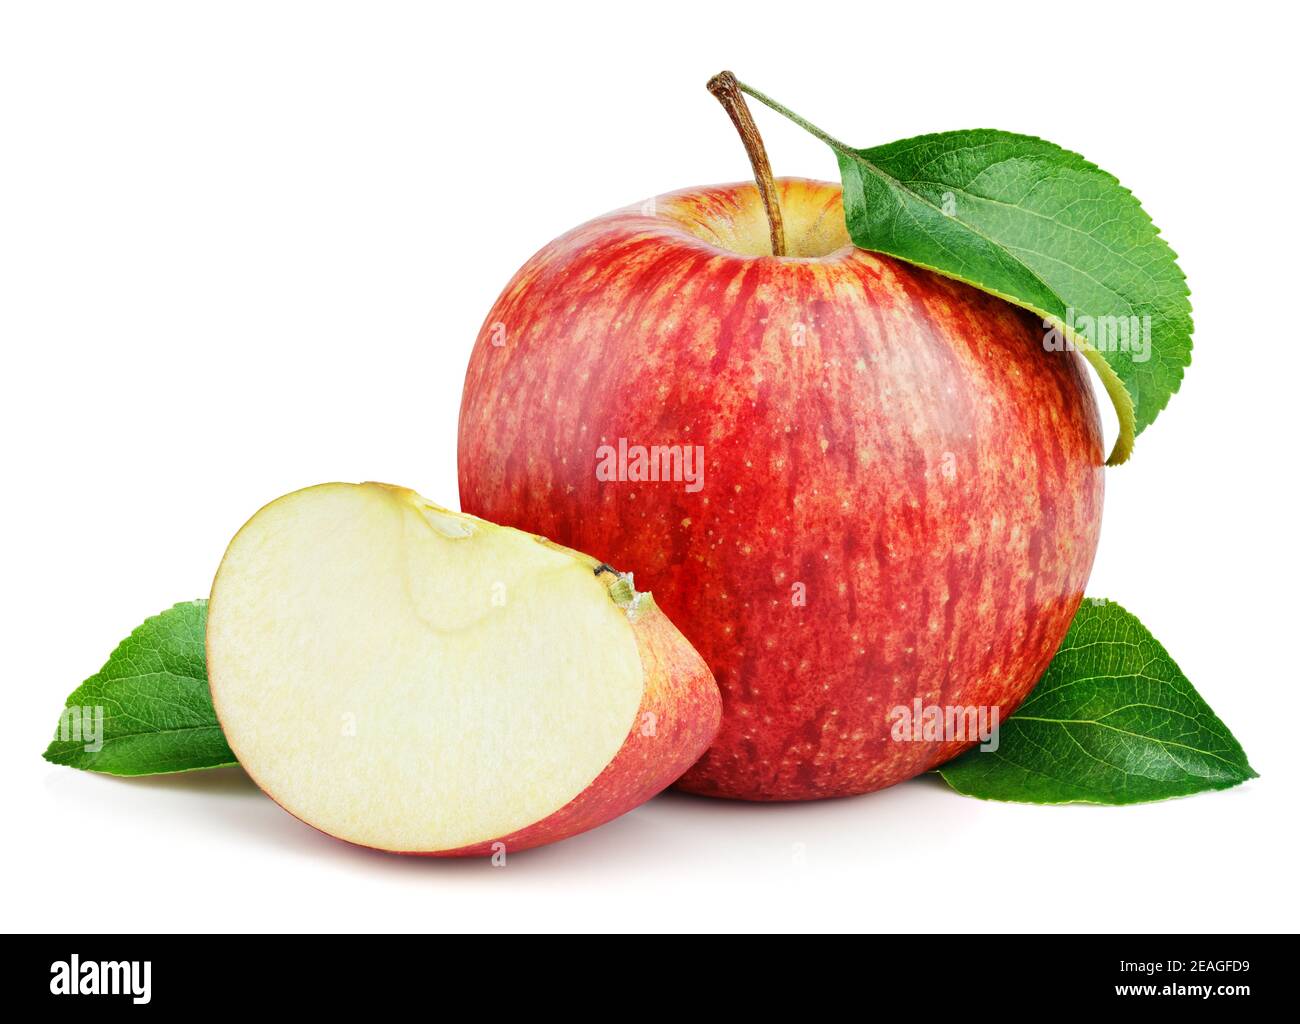 Ripe red apple fruit with apple slice and green leaves isolated on white background. Red apples and leaves with clipping path Stock Photo